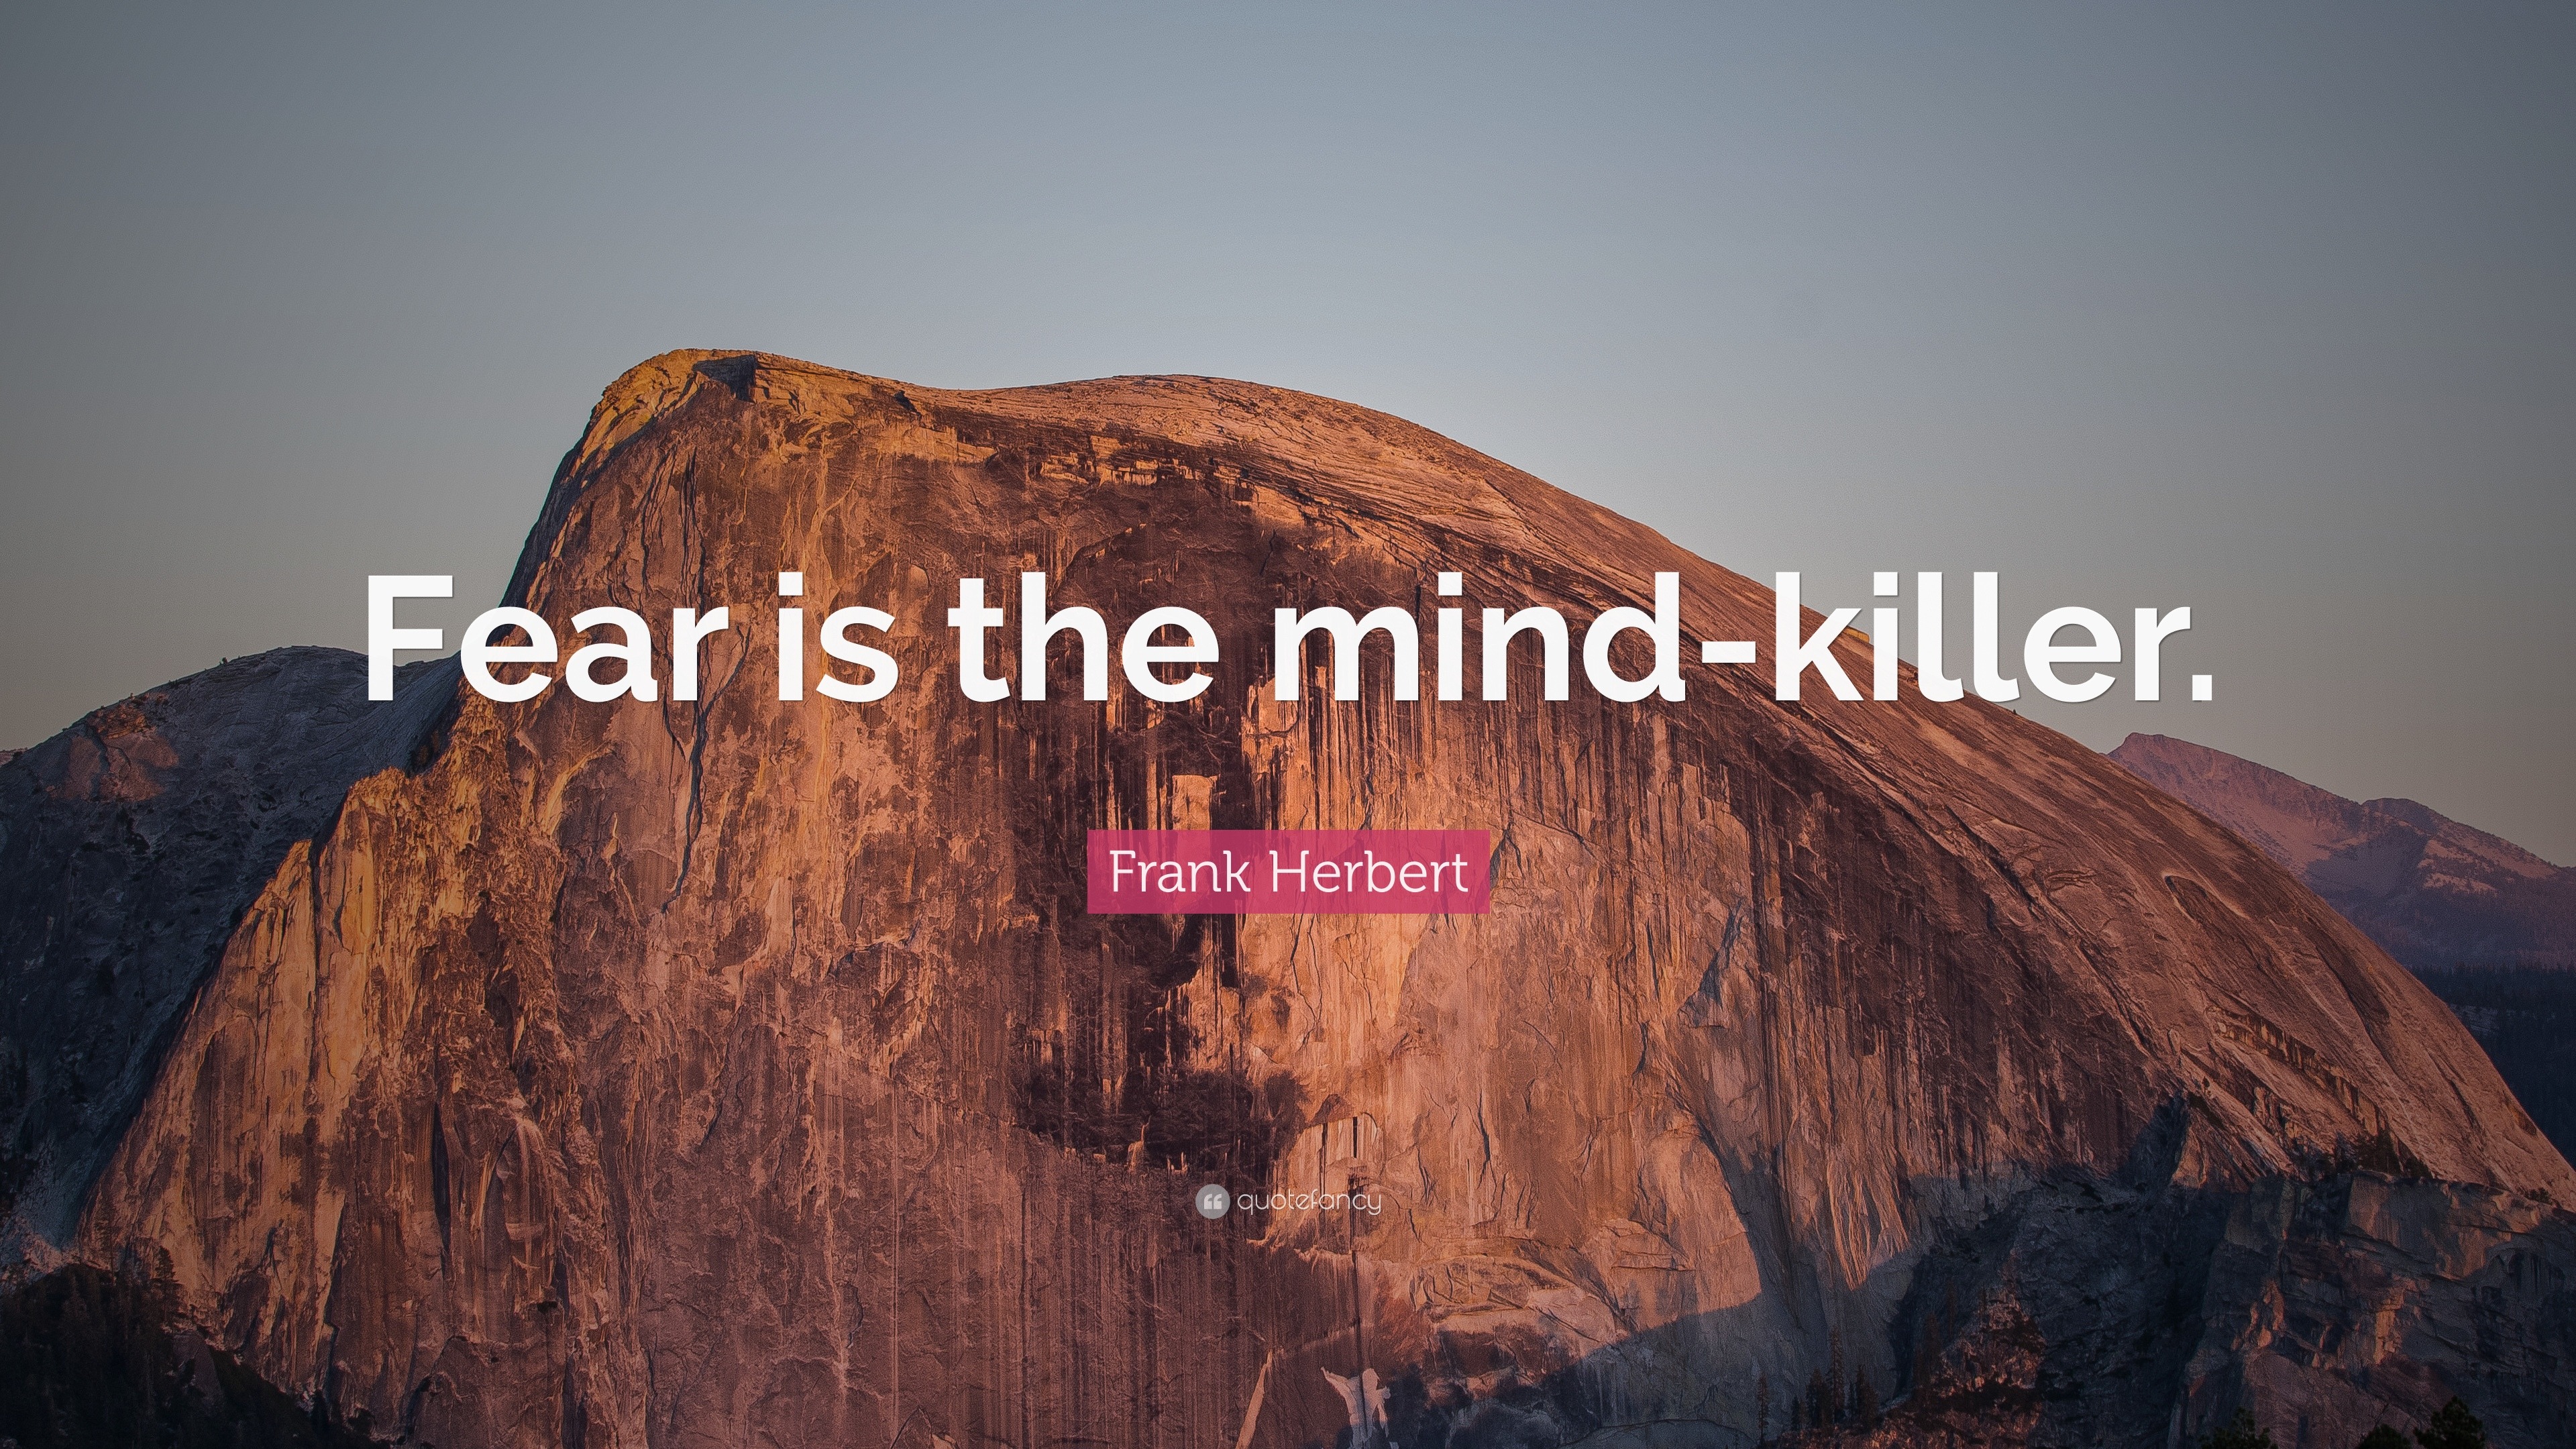 Frank Herbert Quote: “Fear is the mind-killer.” (11 wallpapers